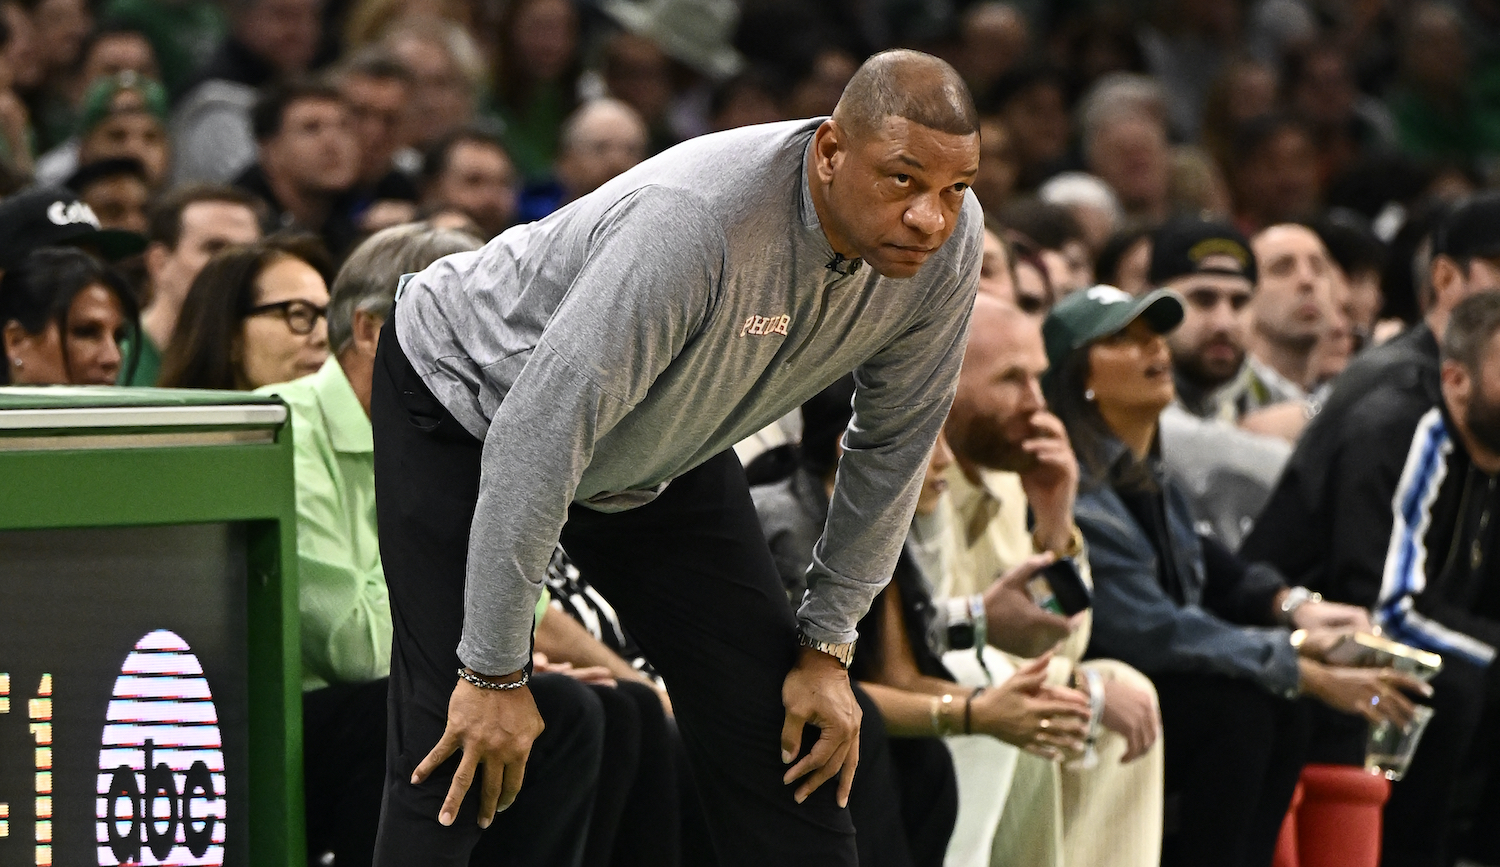 BOSTON, MA - MAY 14: Head Coach Doc Rivers of the 76ers looks on during the game during round two game seven of the 2023 NBA Playoffson May 14, 2023 at the TD Garden in Boston, Massachusetts. NOTE TO USER: User expressly acknowledges and agrees that, by downloading and or using this photograph, User is consenting to the terms and conditions of the Getty Images License Agreement. Mandatory Copyright Notice: Copyright 2023 NBAE (Photo by David Dow/NBAE via Getty Images)